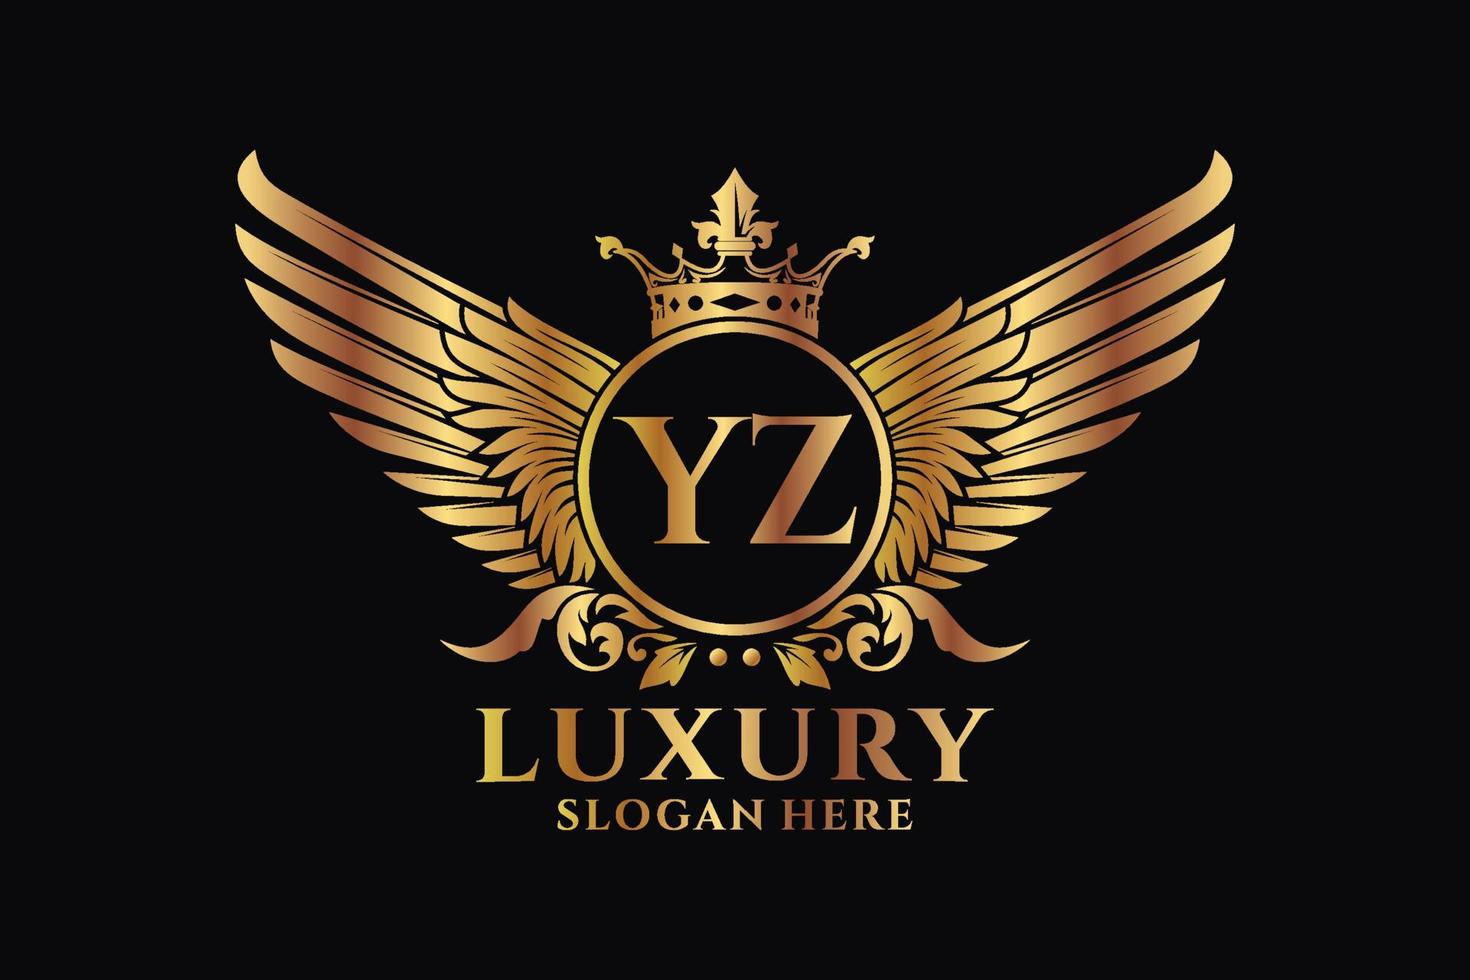 Luxury royal wing Letter YZ crest Gold color Logo vector, Victory logo, crest logo, wing logo, vector logo template.